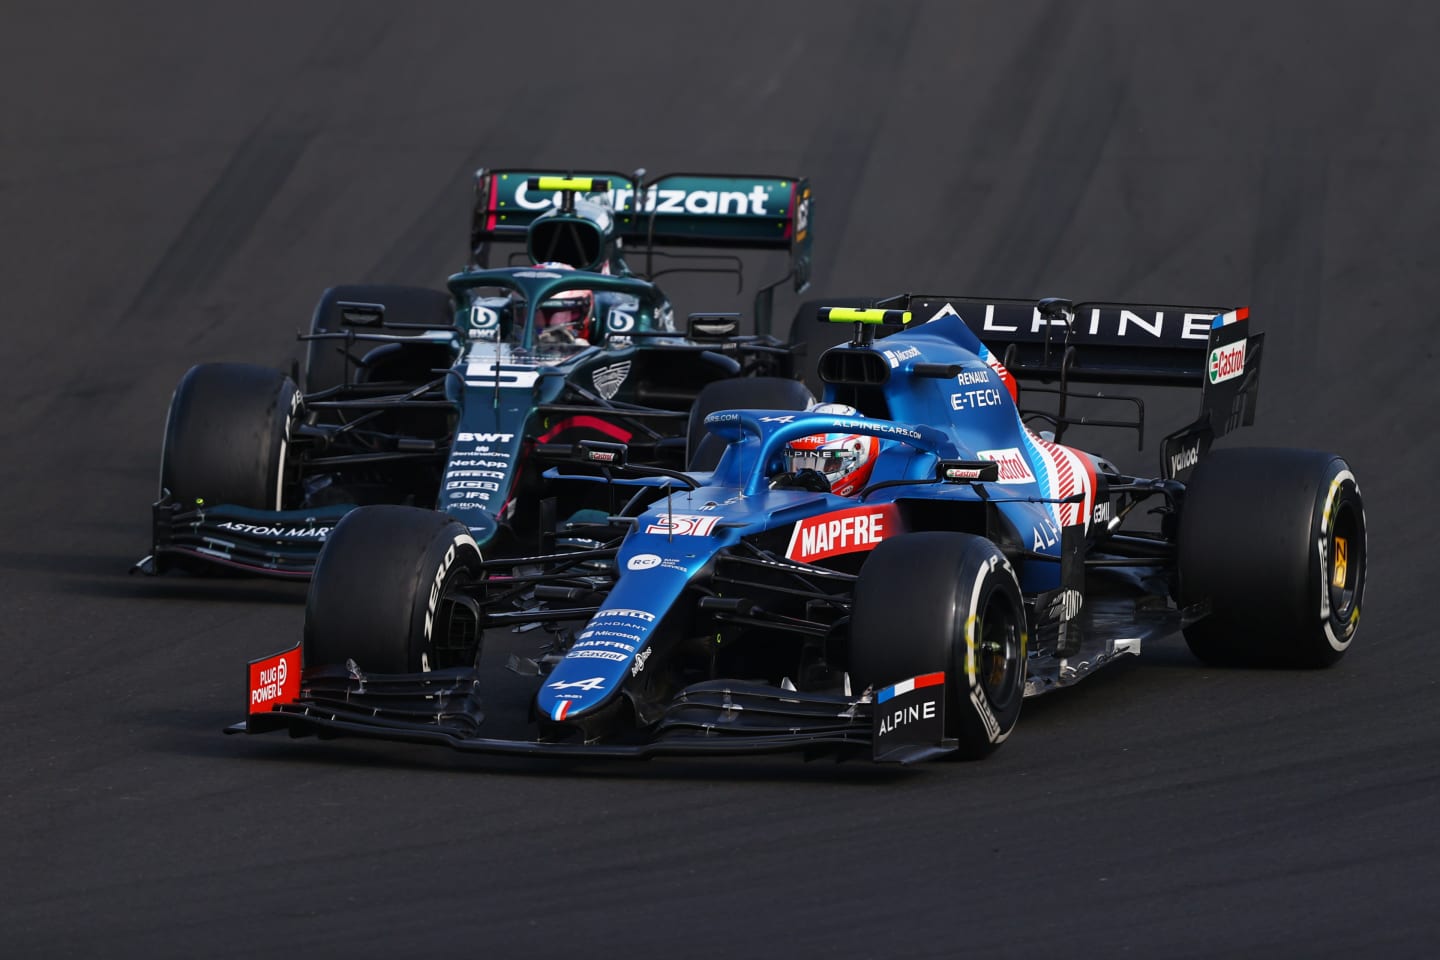 BUDAPEST, HUNGARY - AUGUST 01: Esteban Ocon of France driving the (31) Alpine A521 Renault leads Sebastian Vettel of Germany driving the (5) Aston Martin AMR21 Mercedes during the F1 Grand Prix of Hungary at Hungaroring on August 01, 2021 in Budapest, Hungary. (Photo by Bryn Lennon/Getty Images)